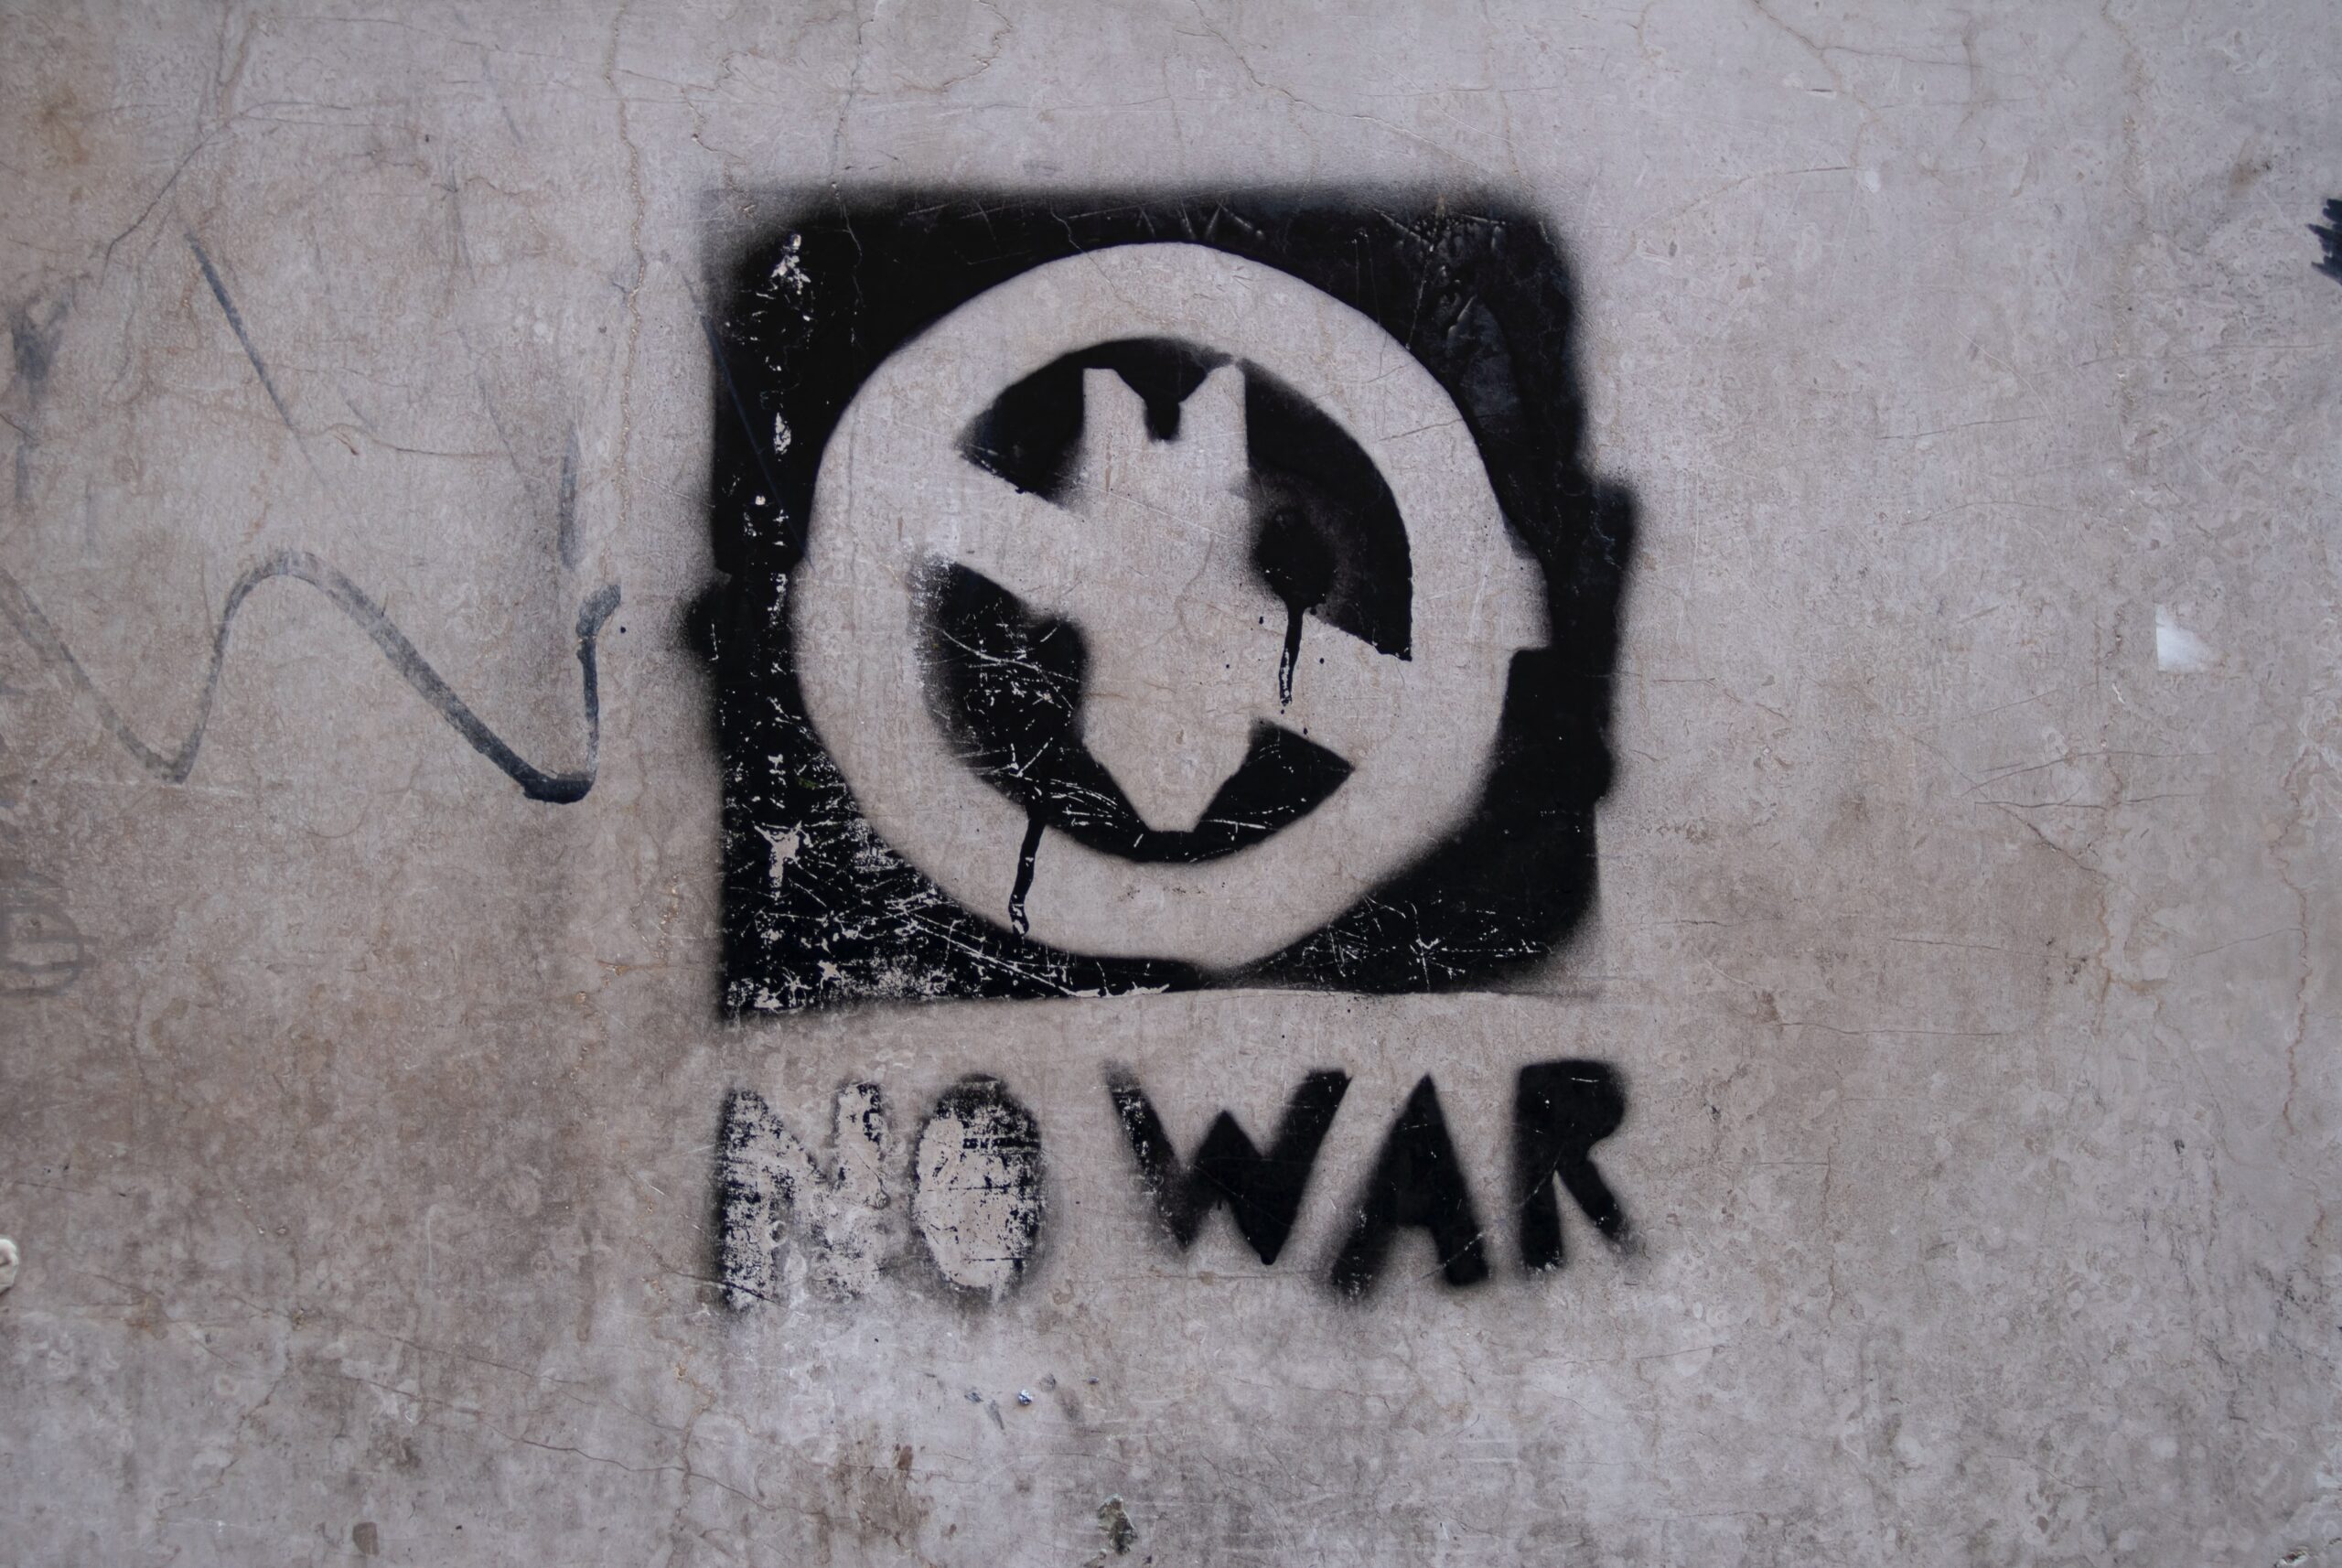 No war painted on a wall